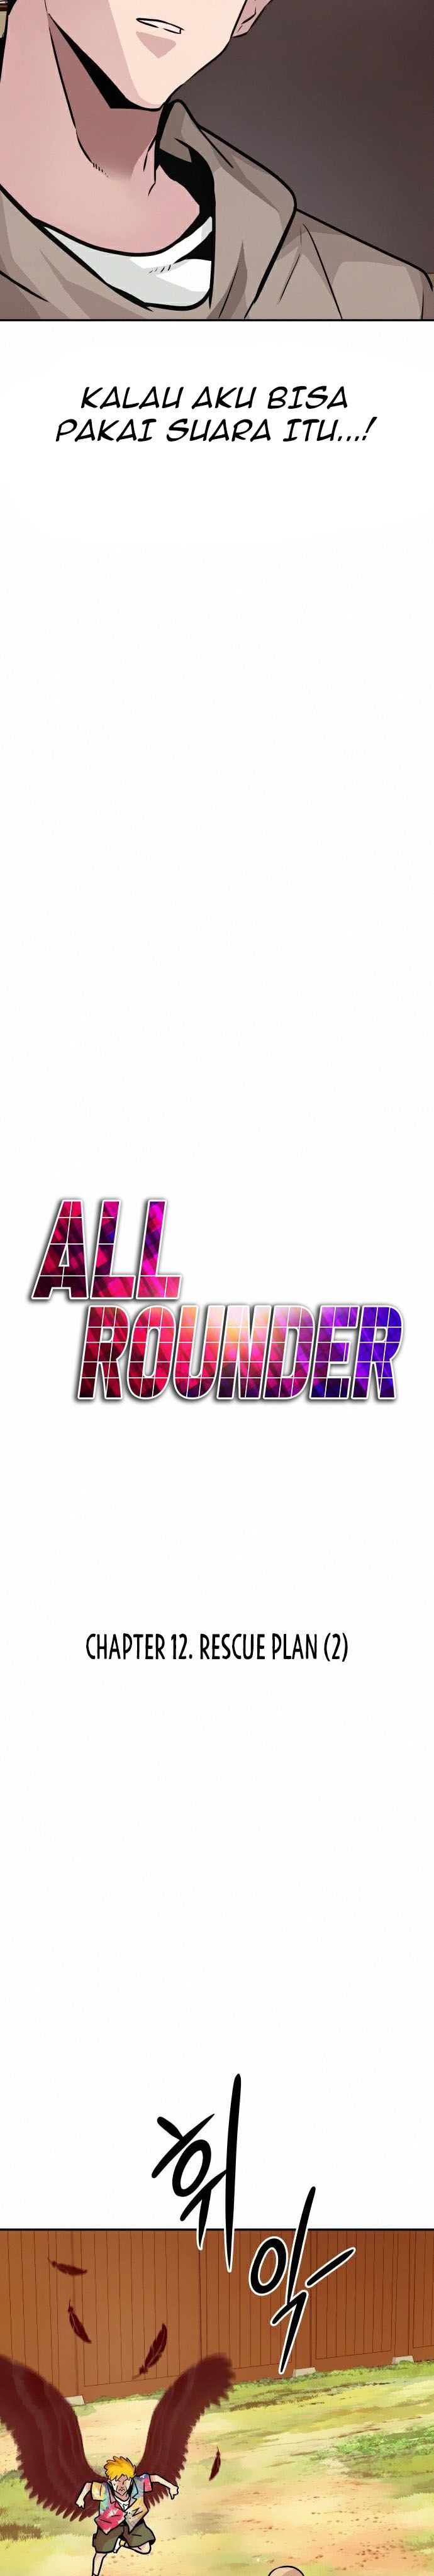 All Rounder Chapter 12